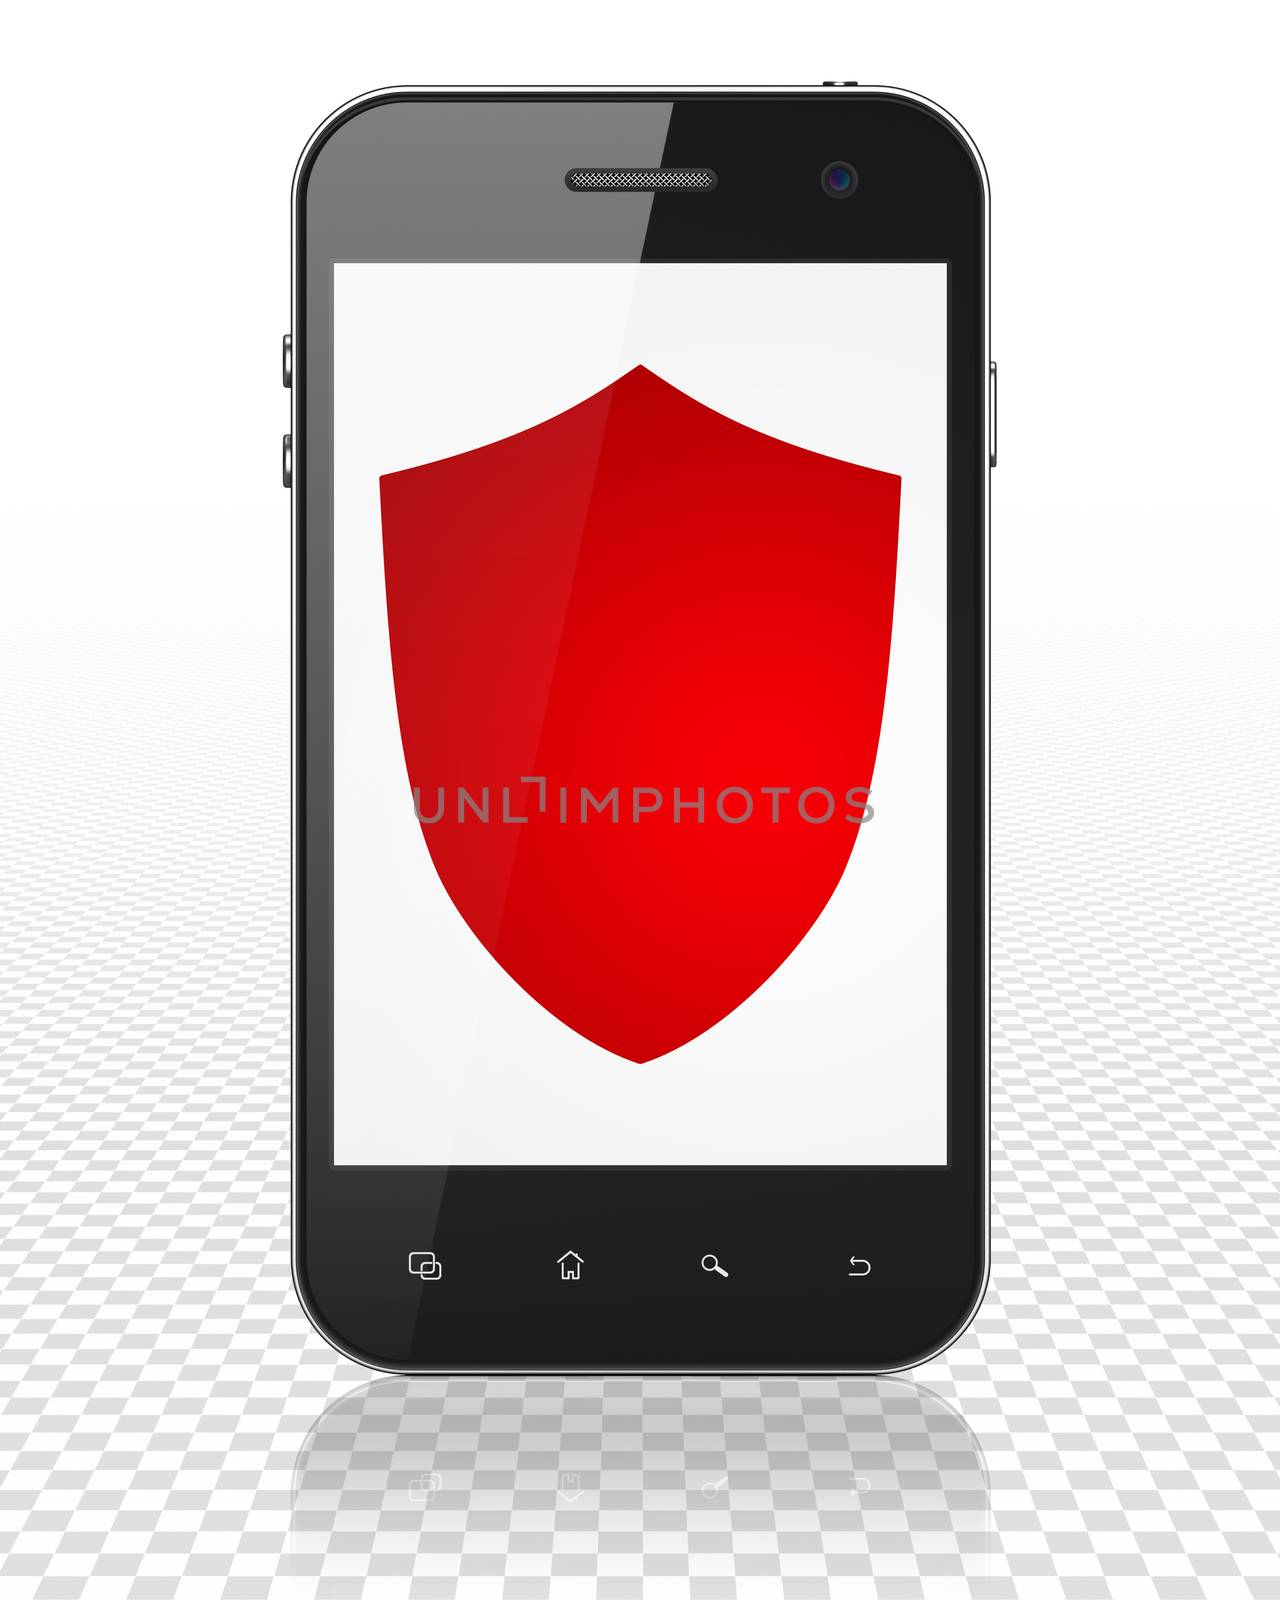 Protection concept: Smartphone with red Shield icon on display